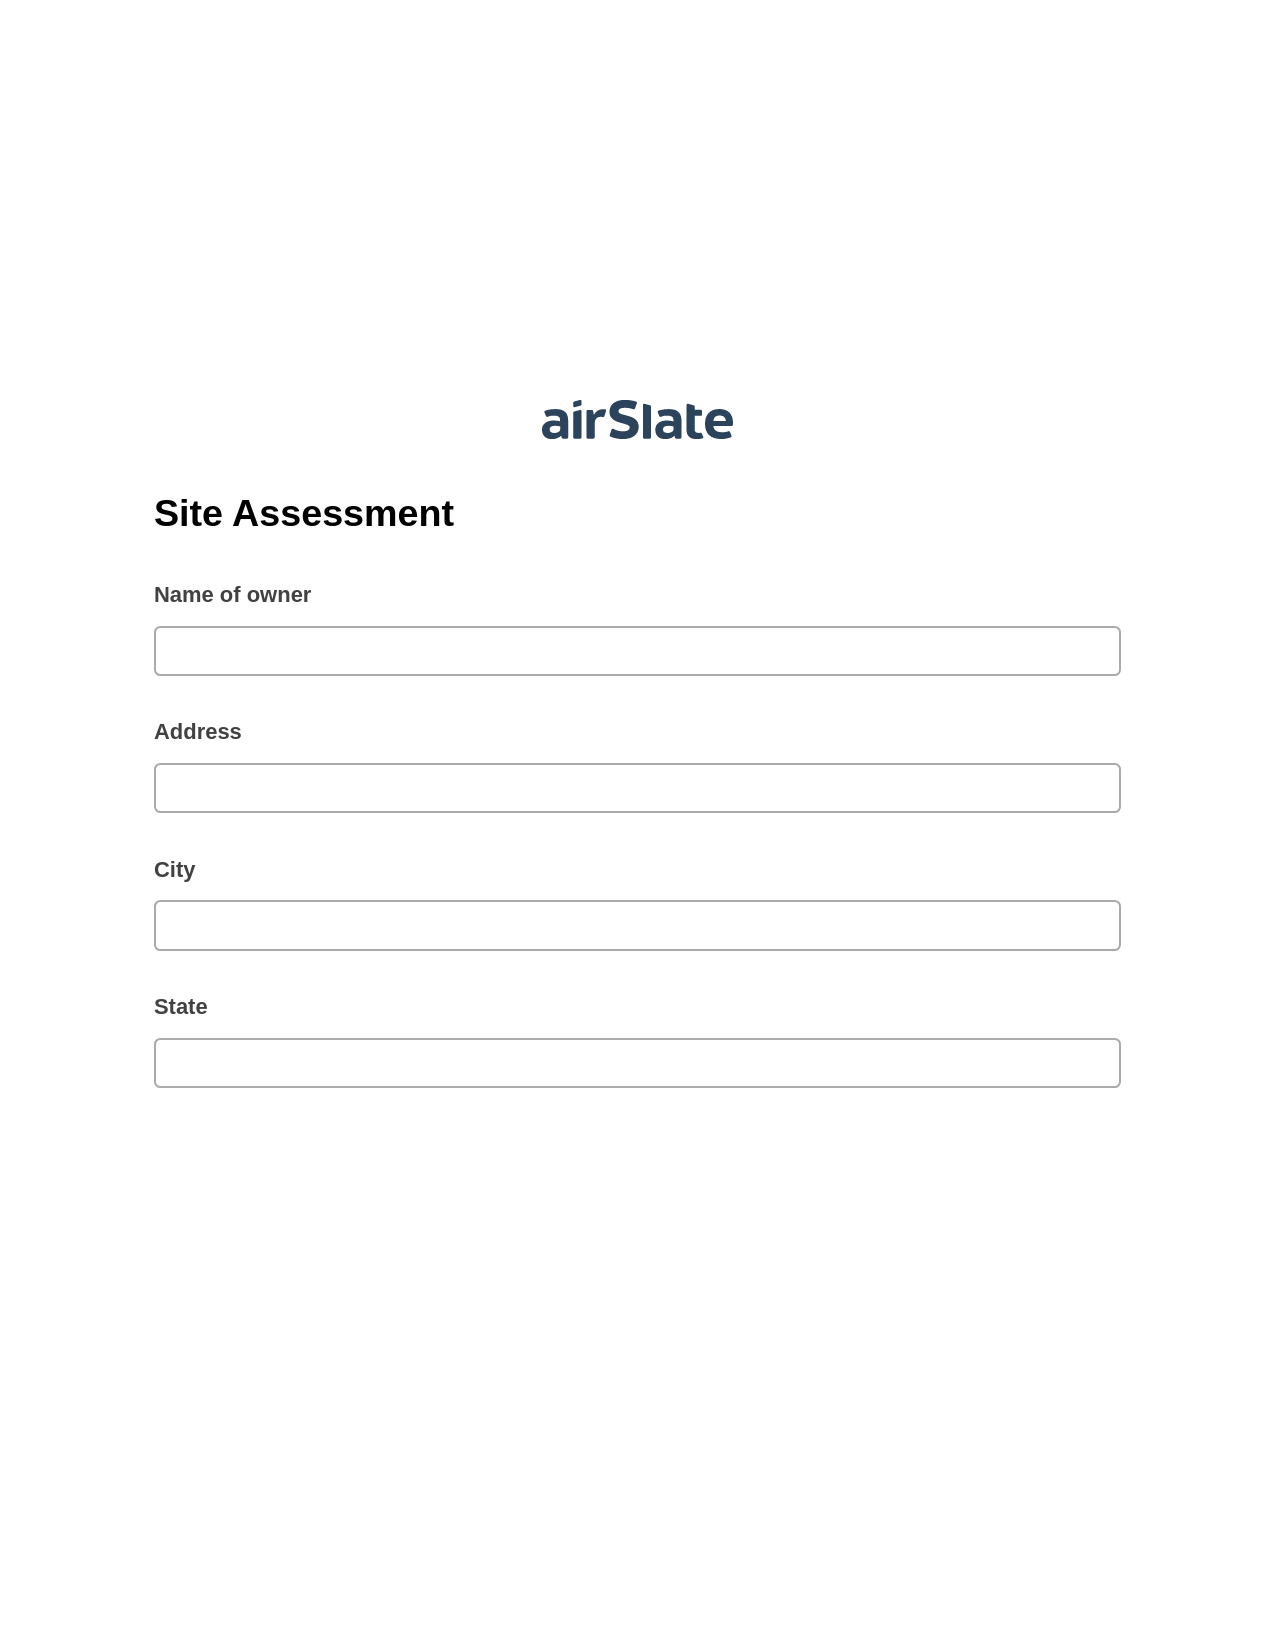 Site Assessment Pre-fill Dropdown from Airtable, Google Sheet Two-Way Binding Bot, Google Drive Bot